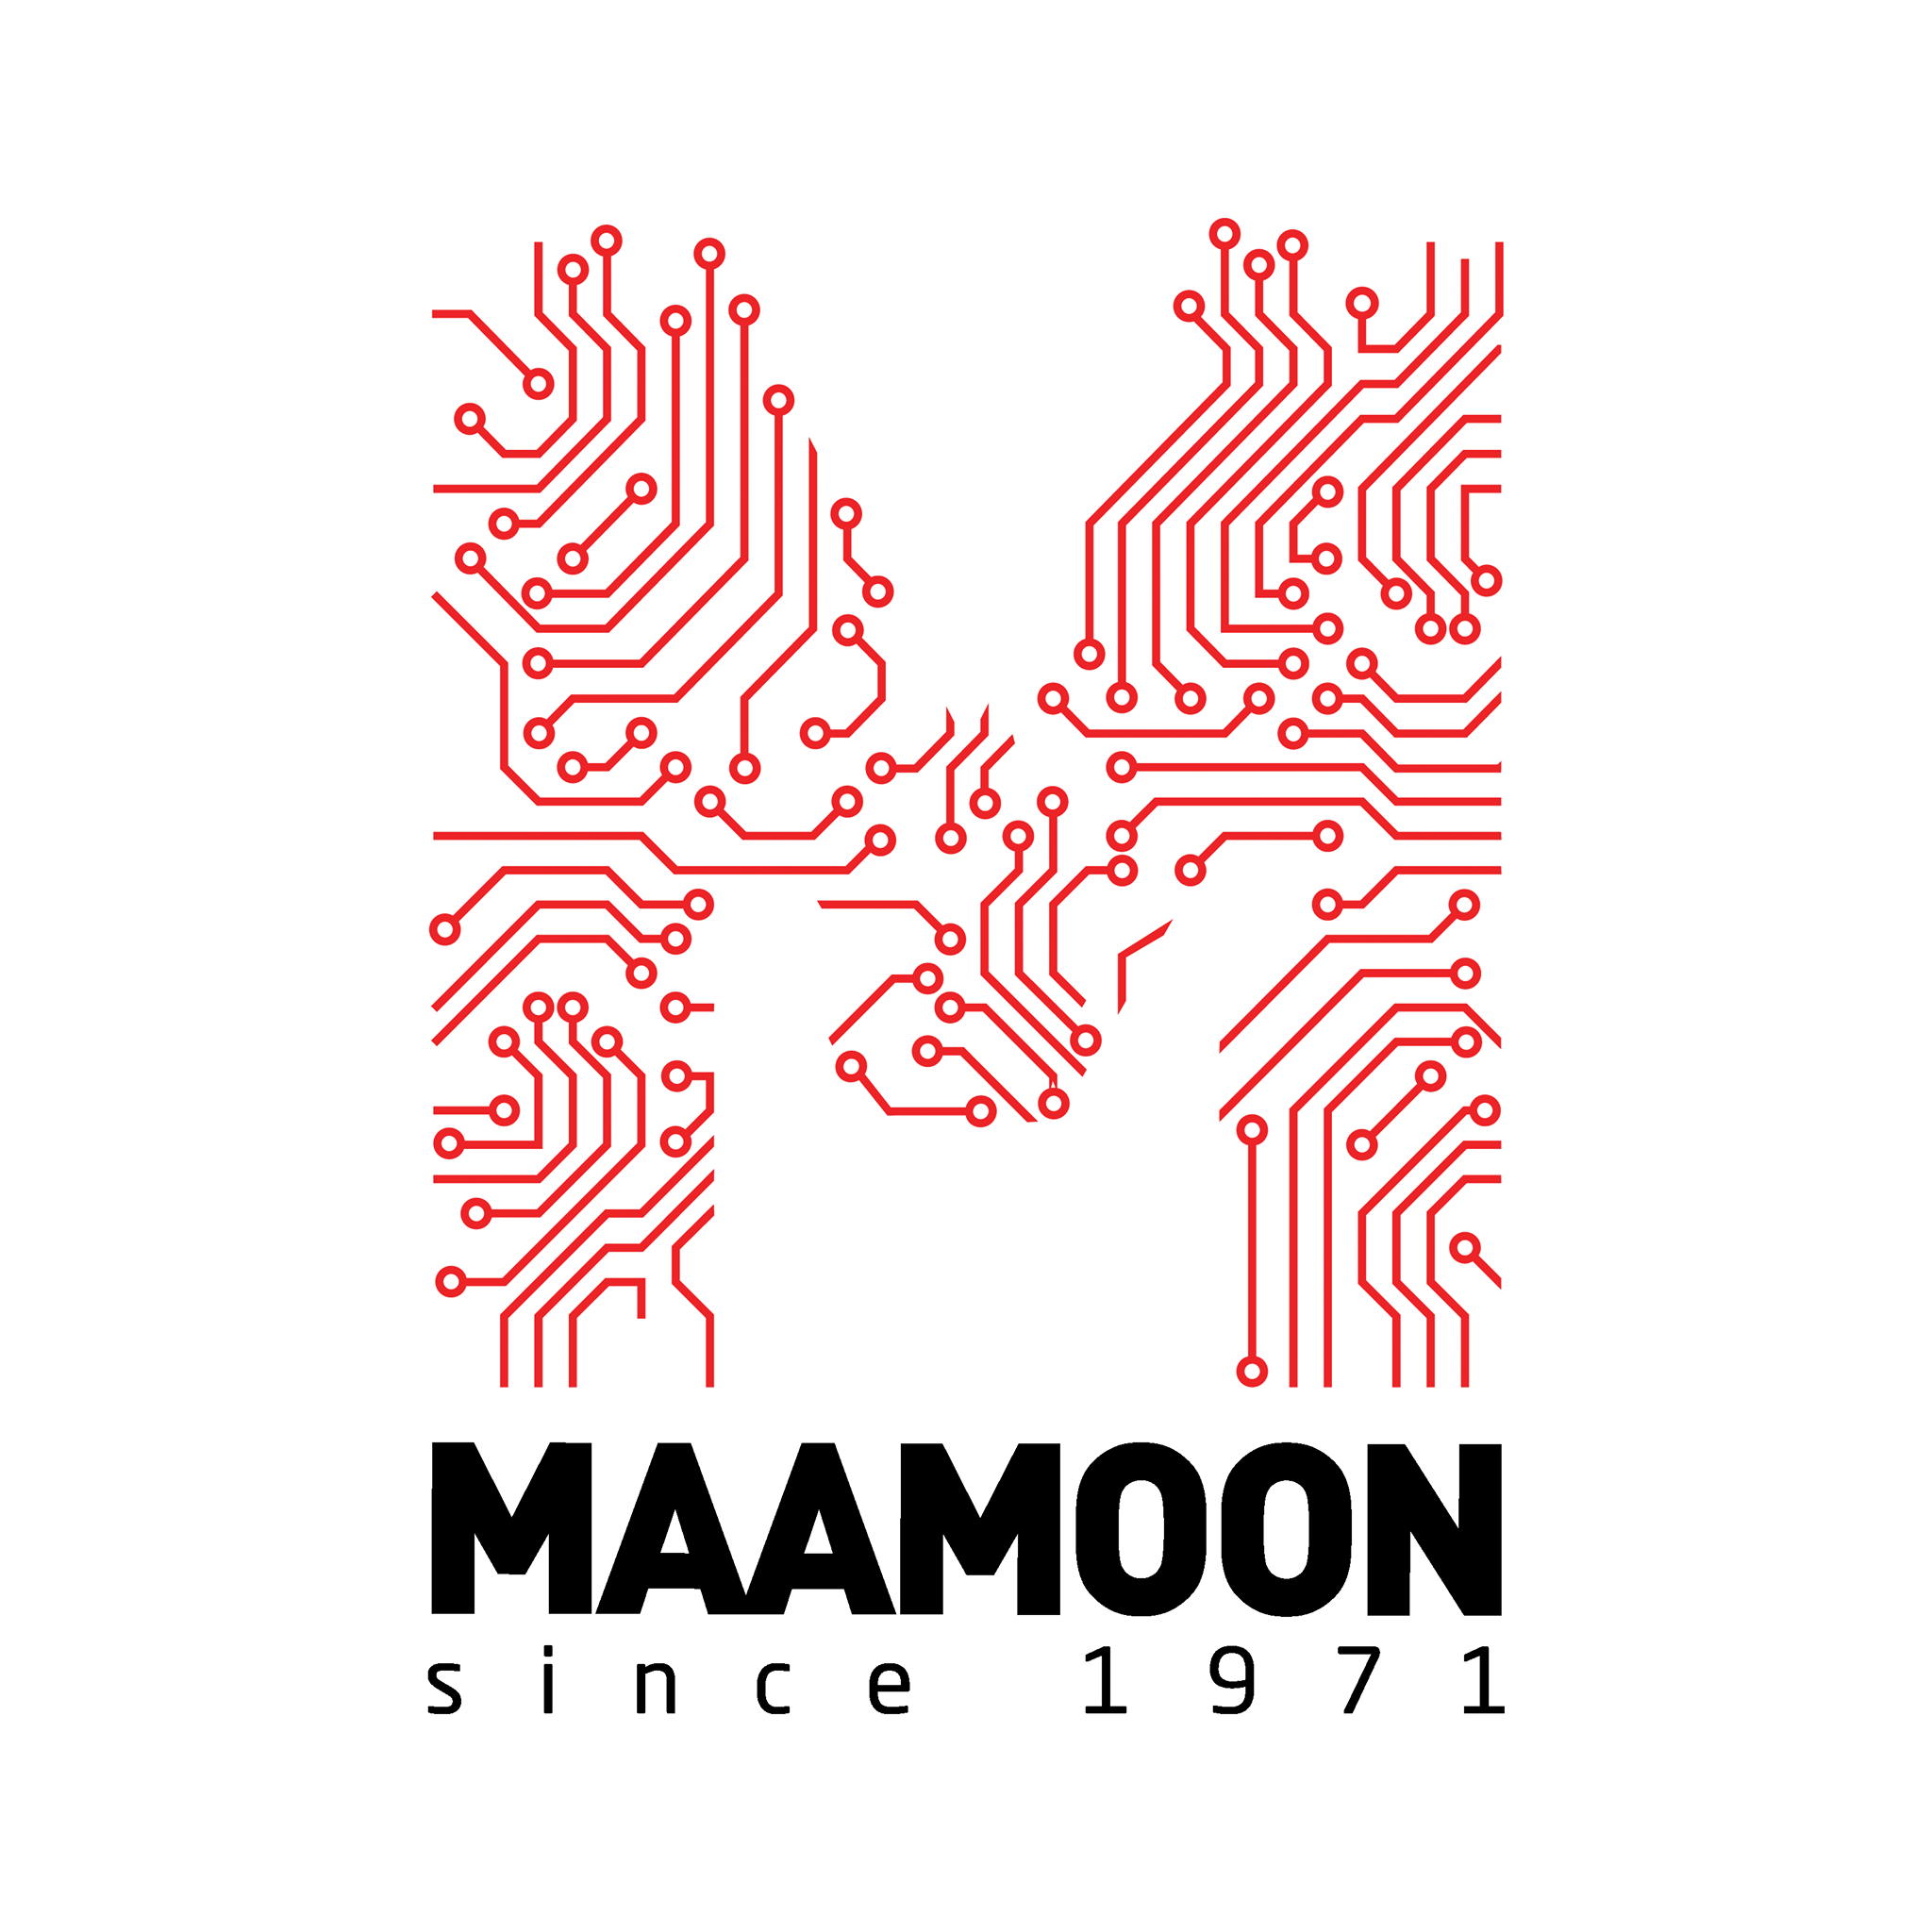 Maamoon Est. For Electrical Engineering